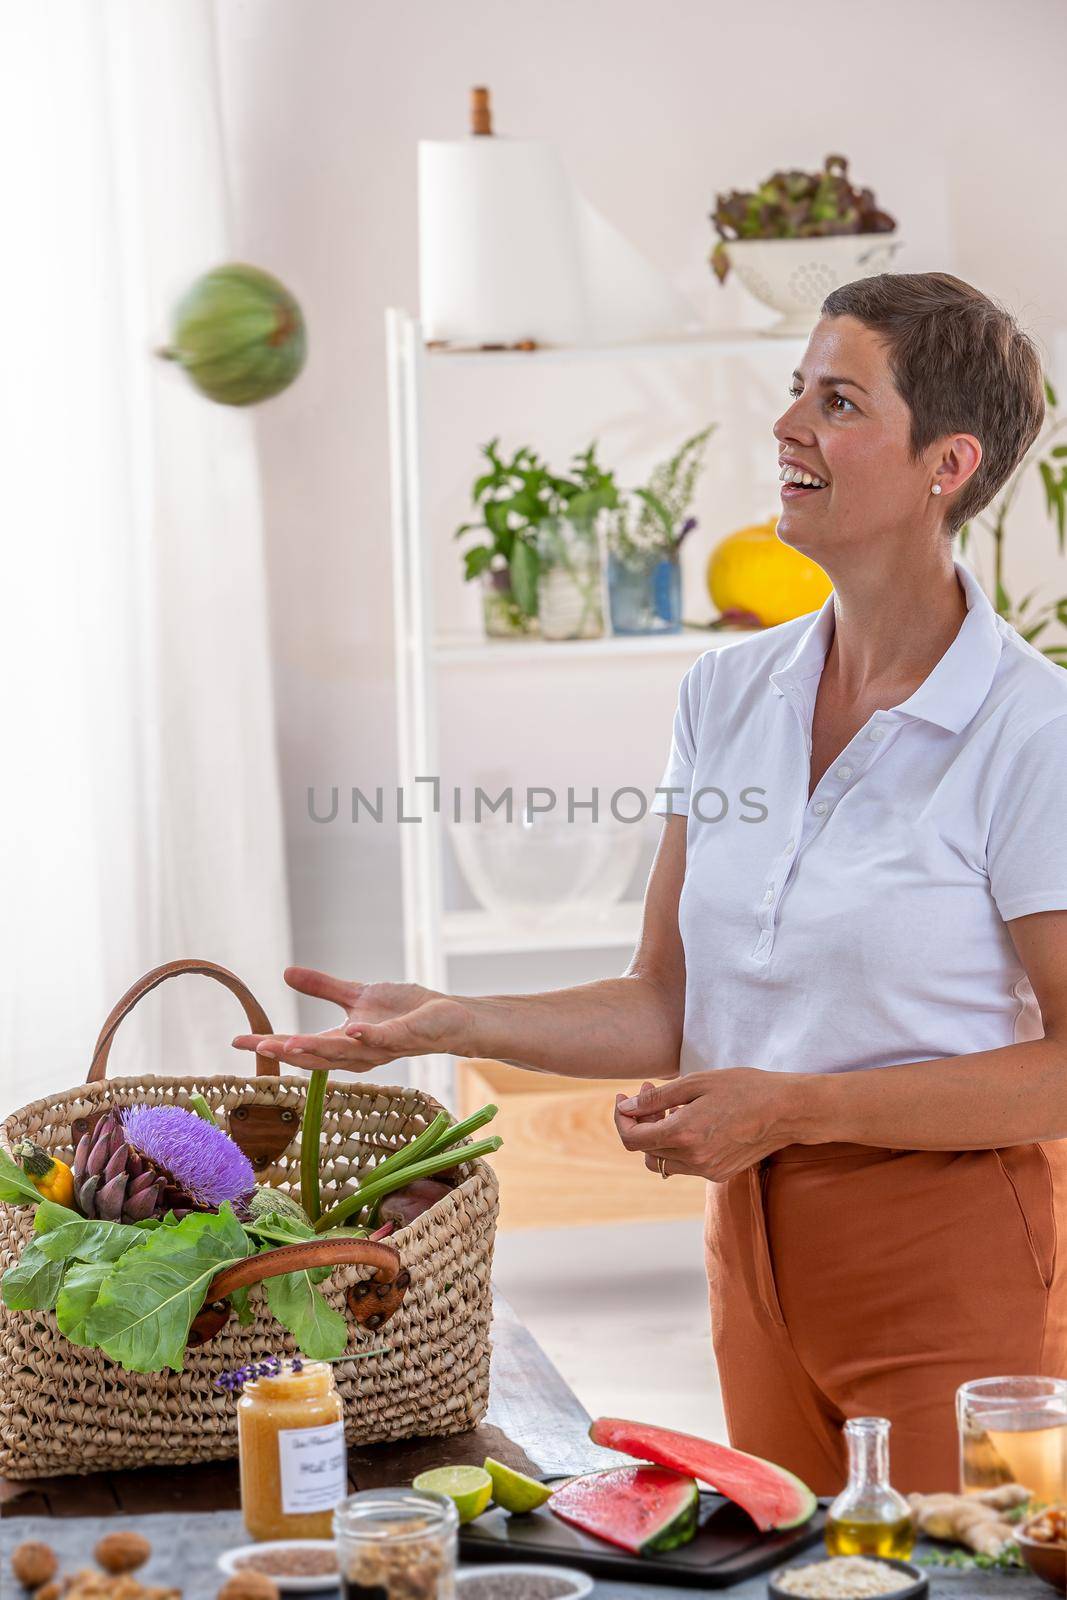 The woman plays with the round zucchini by throwing it into the air.